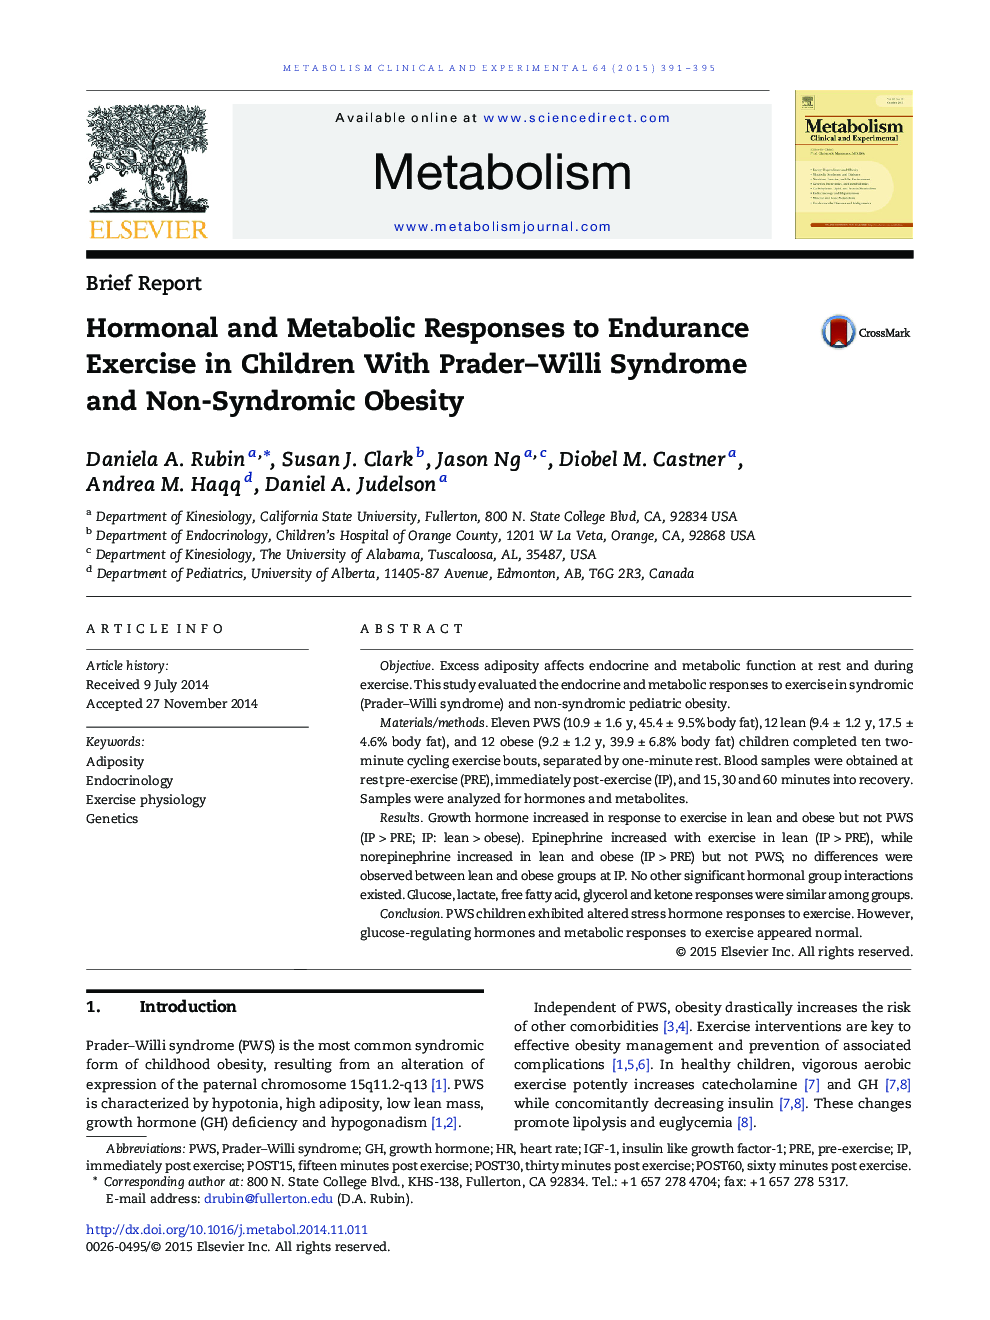 Hormonal and Metabolic Responses to Endurance Exercise in Children With Prader–Willi Syndrome and Non-Syndromic Obesity